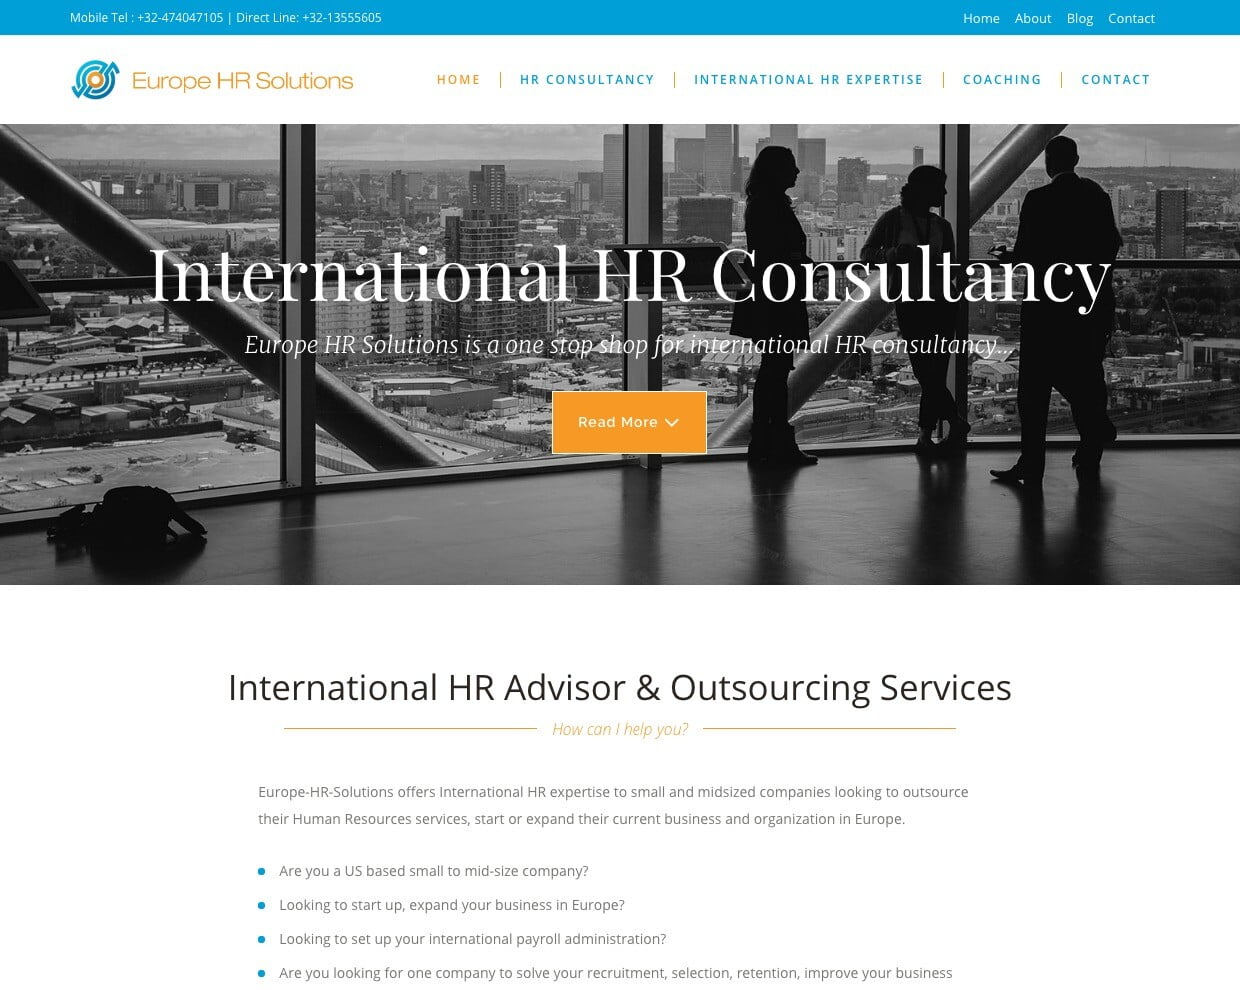 Europe HR Solutions